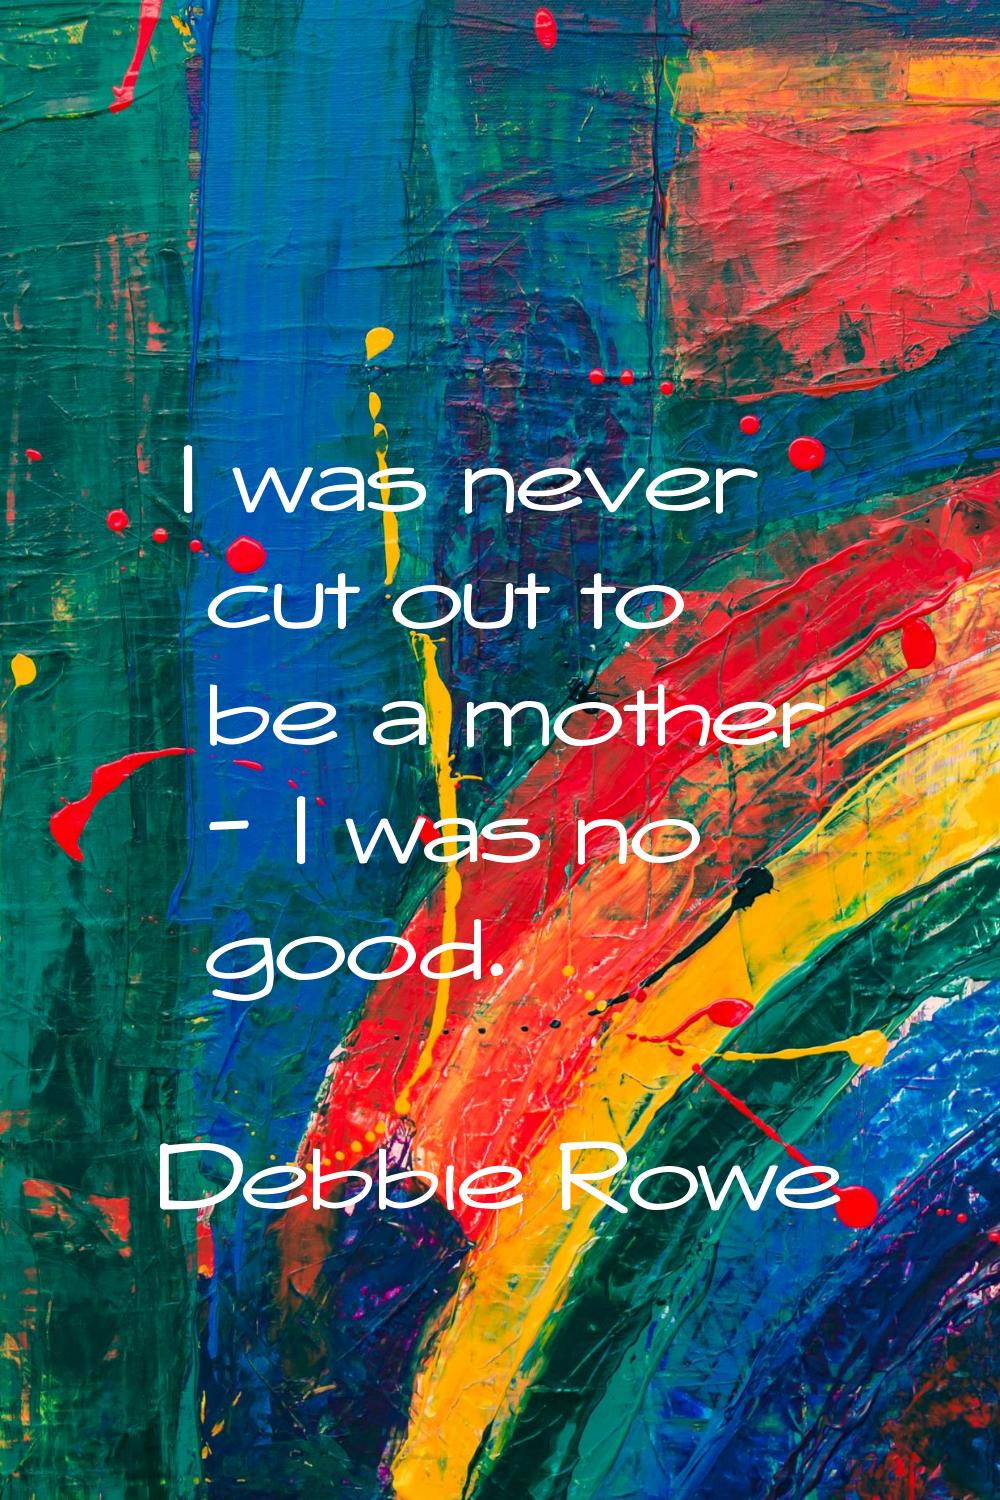 I was never cut out to be a mother - I was no good.